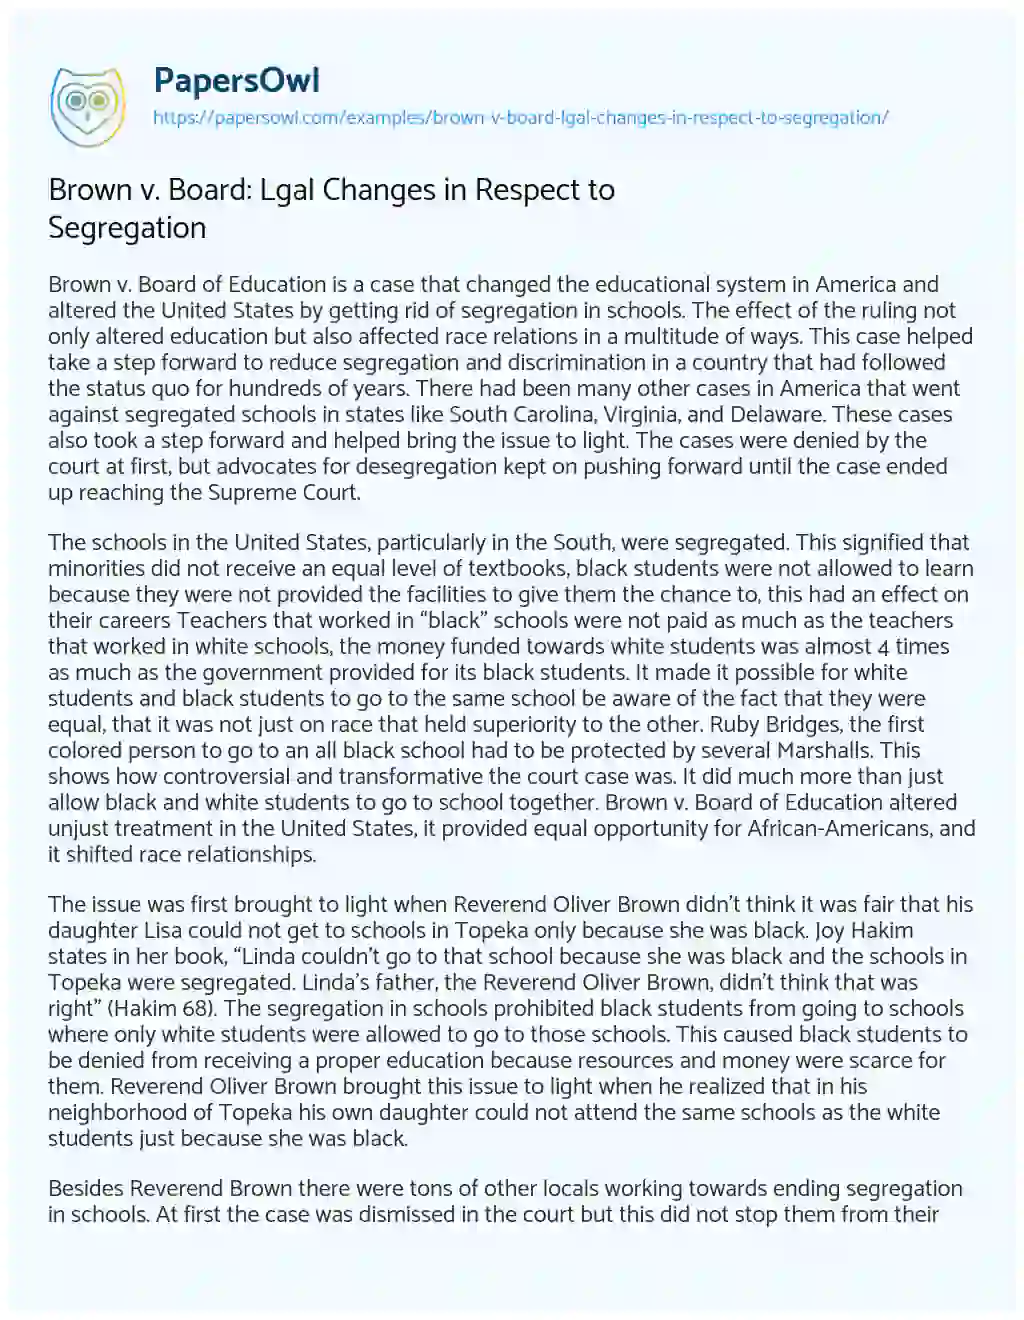 Essay on Brown V. Board: Lgal Changes in Respect to Segregation